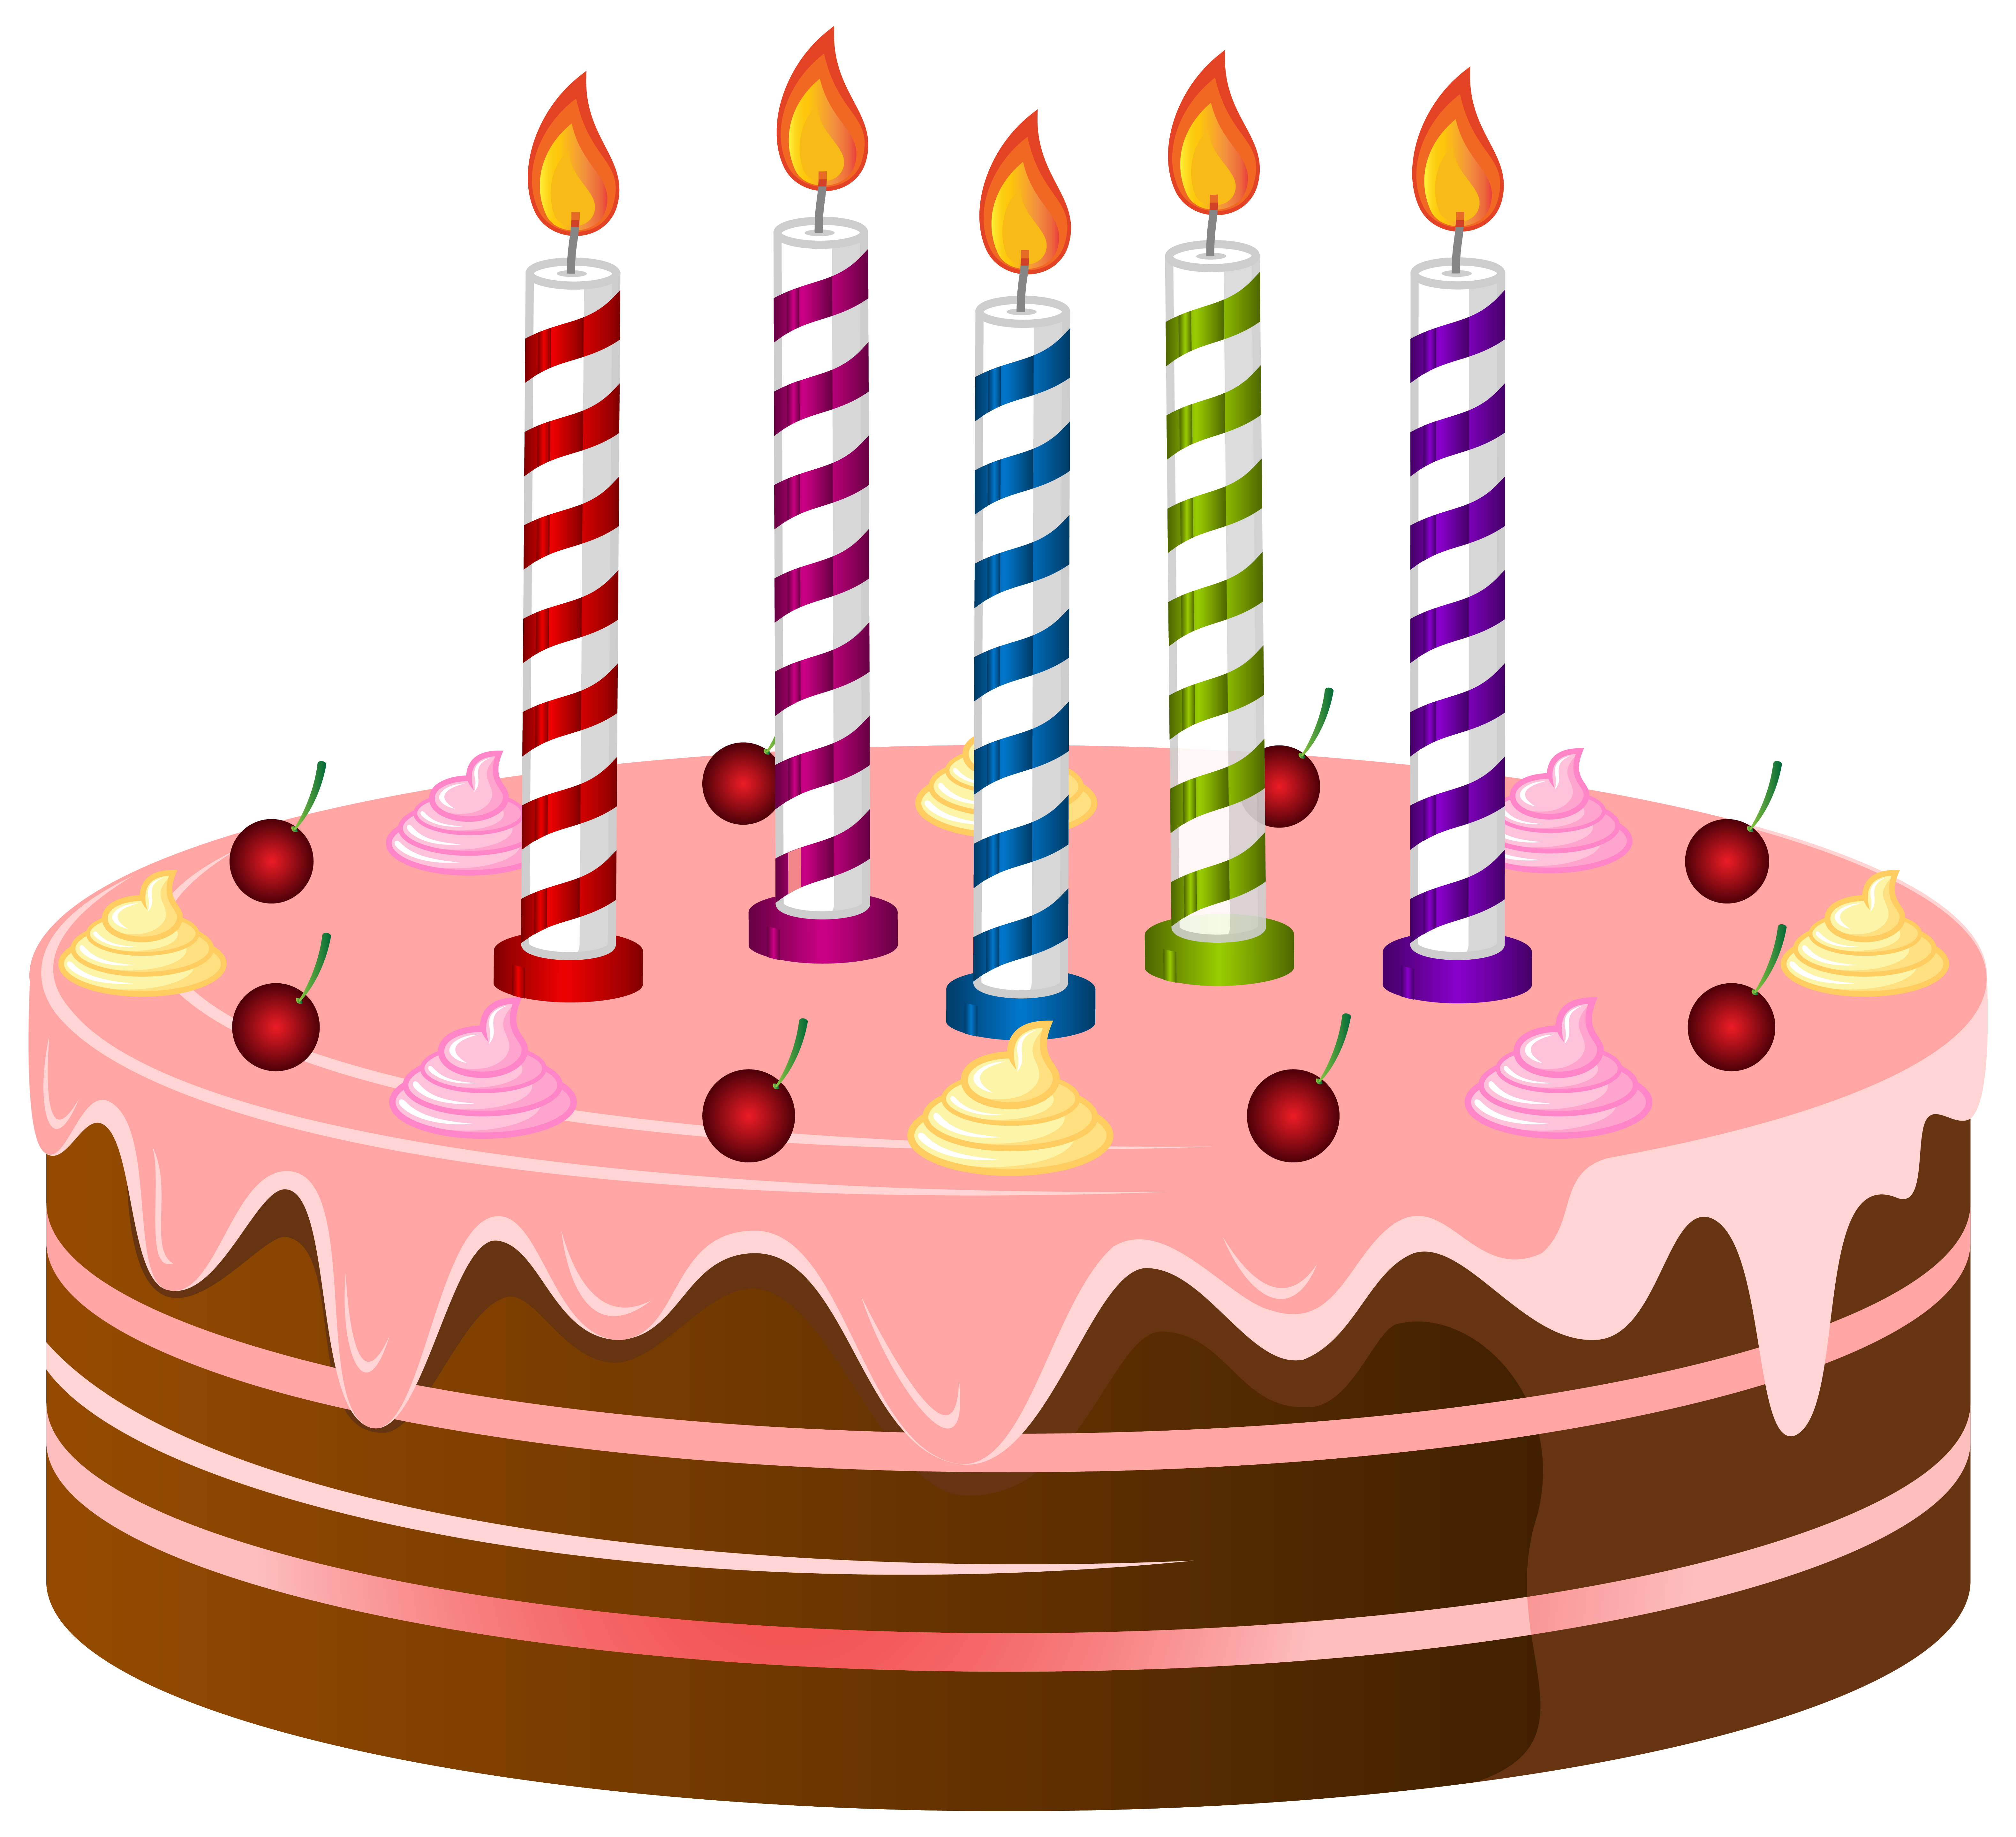 Free birthday cake clip art free clipart images 